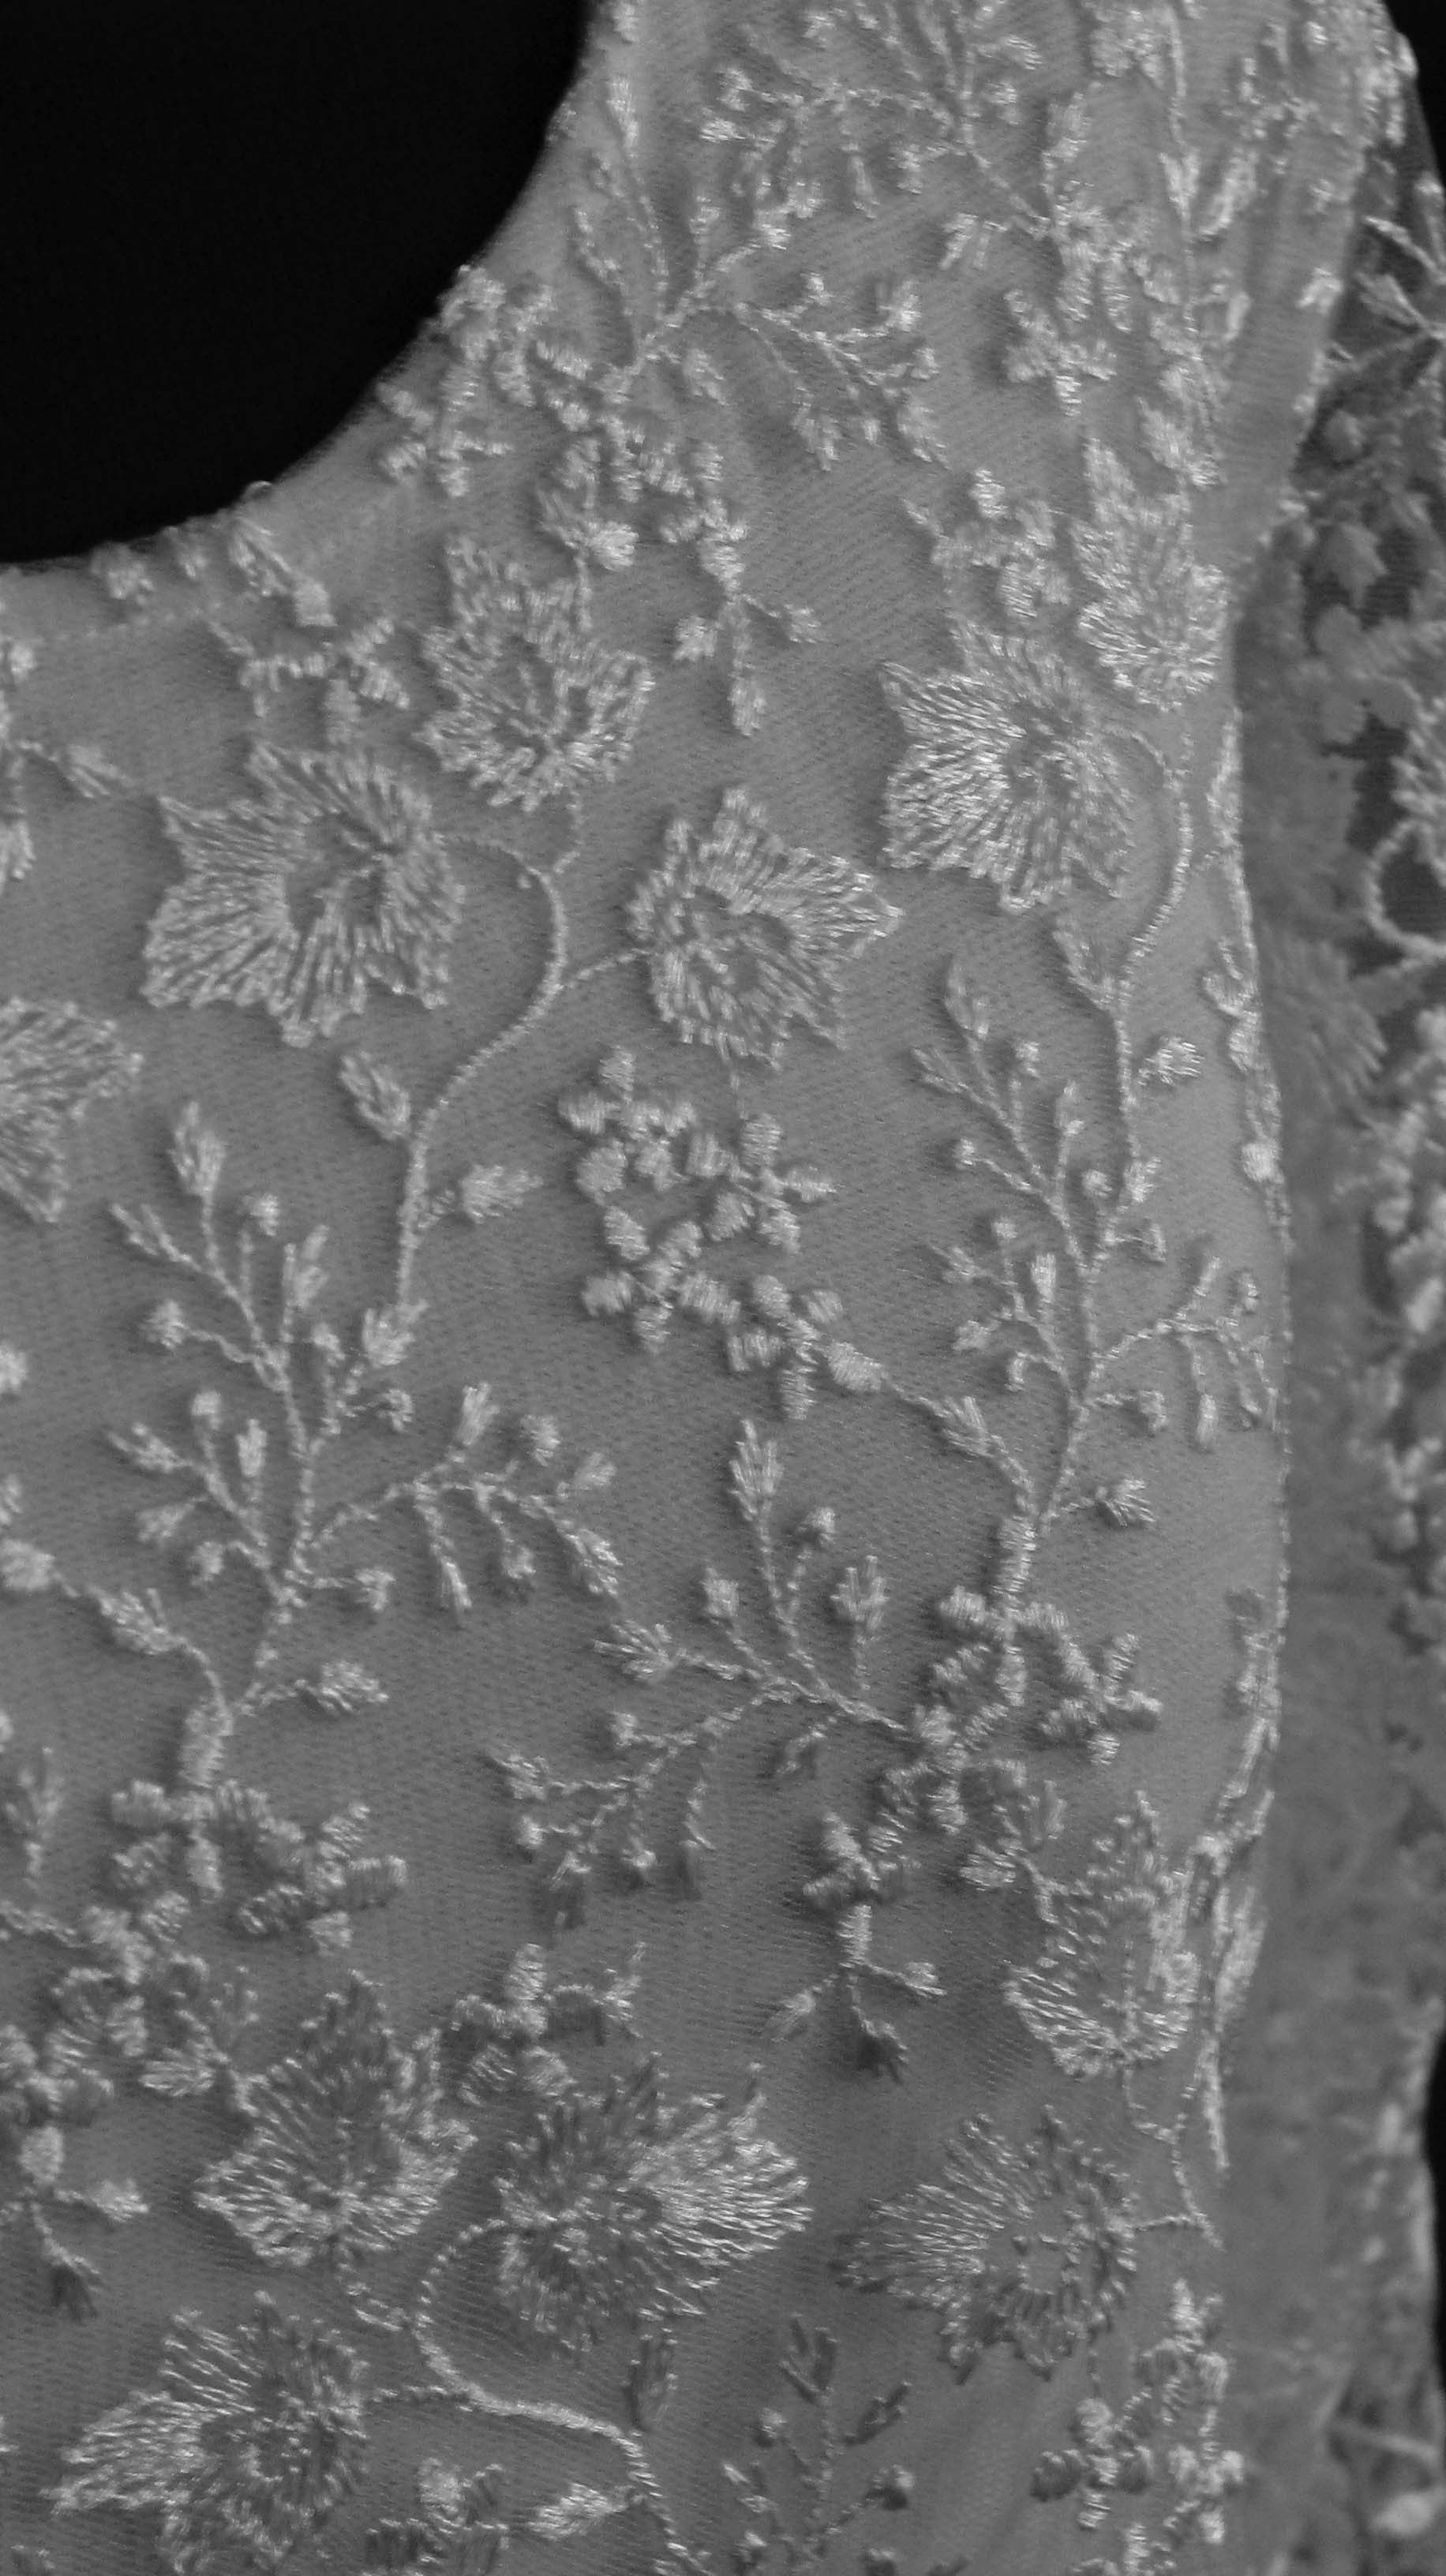 Christina Fairbanks lace detail 35gownfcux.jpg